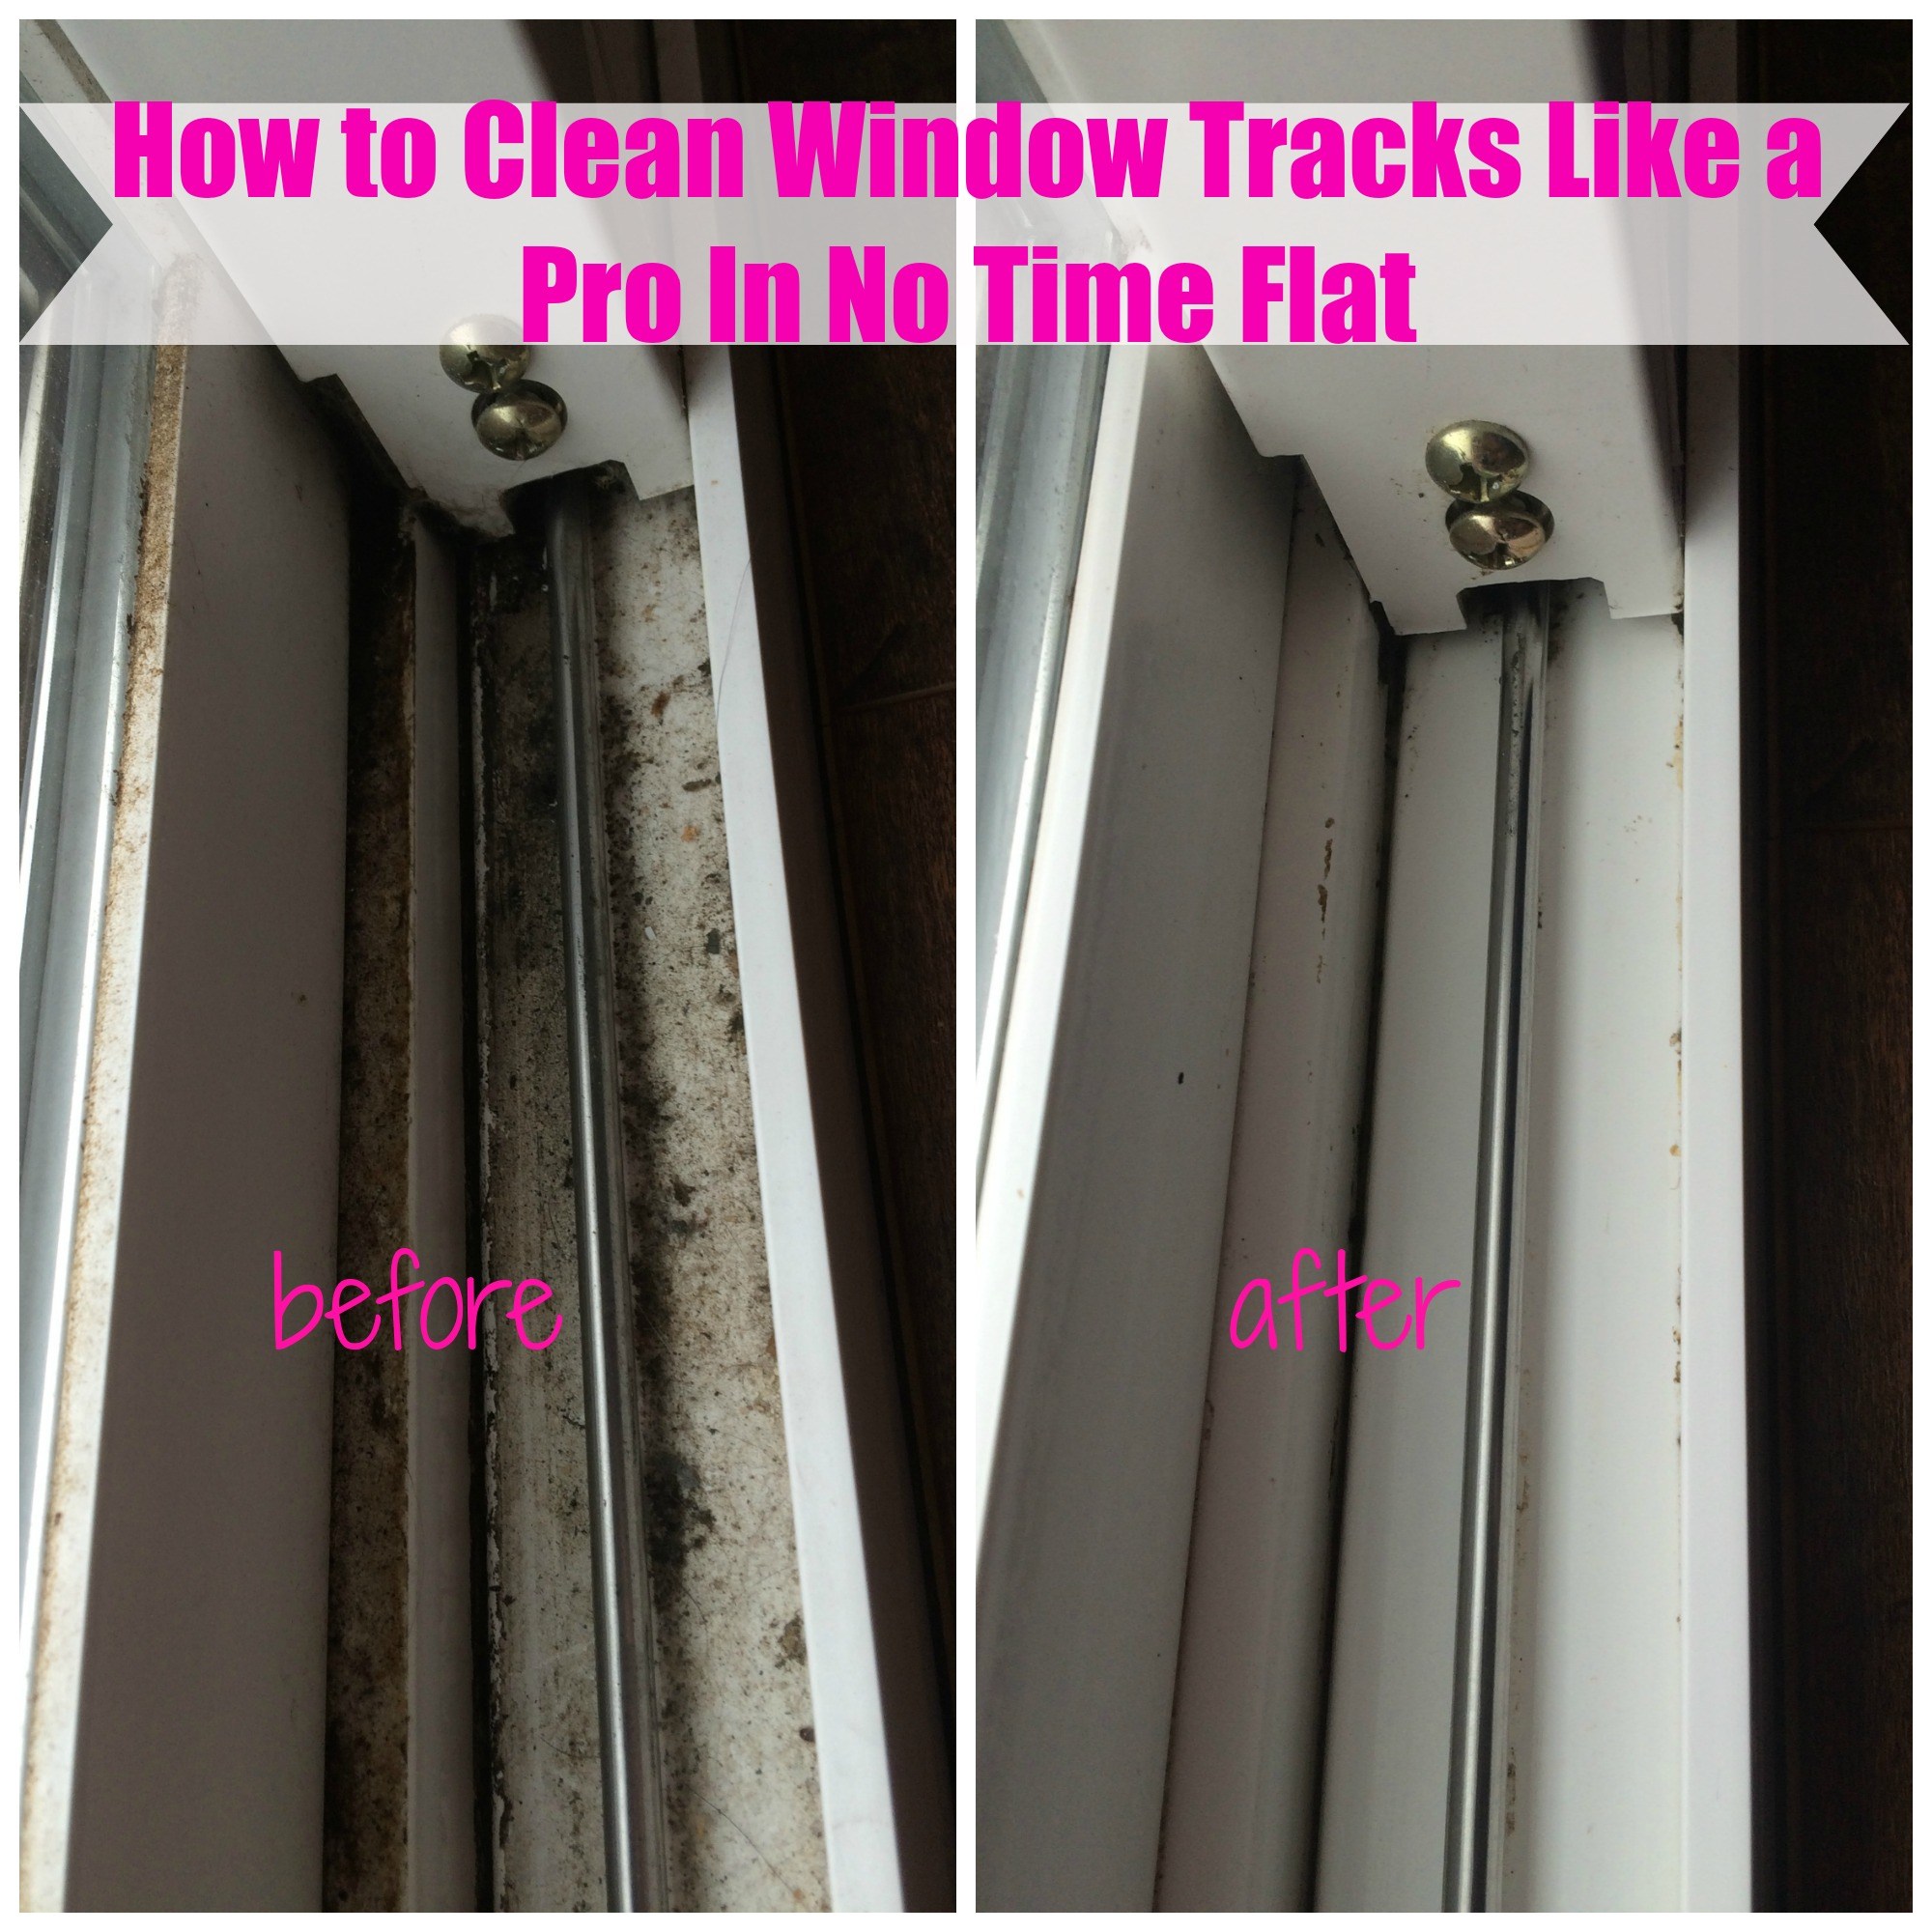 How to Clean Window Tracks Like a Pro In No Time Flat